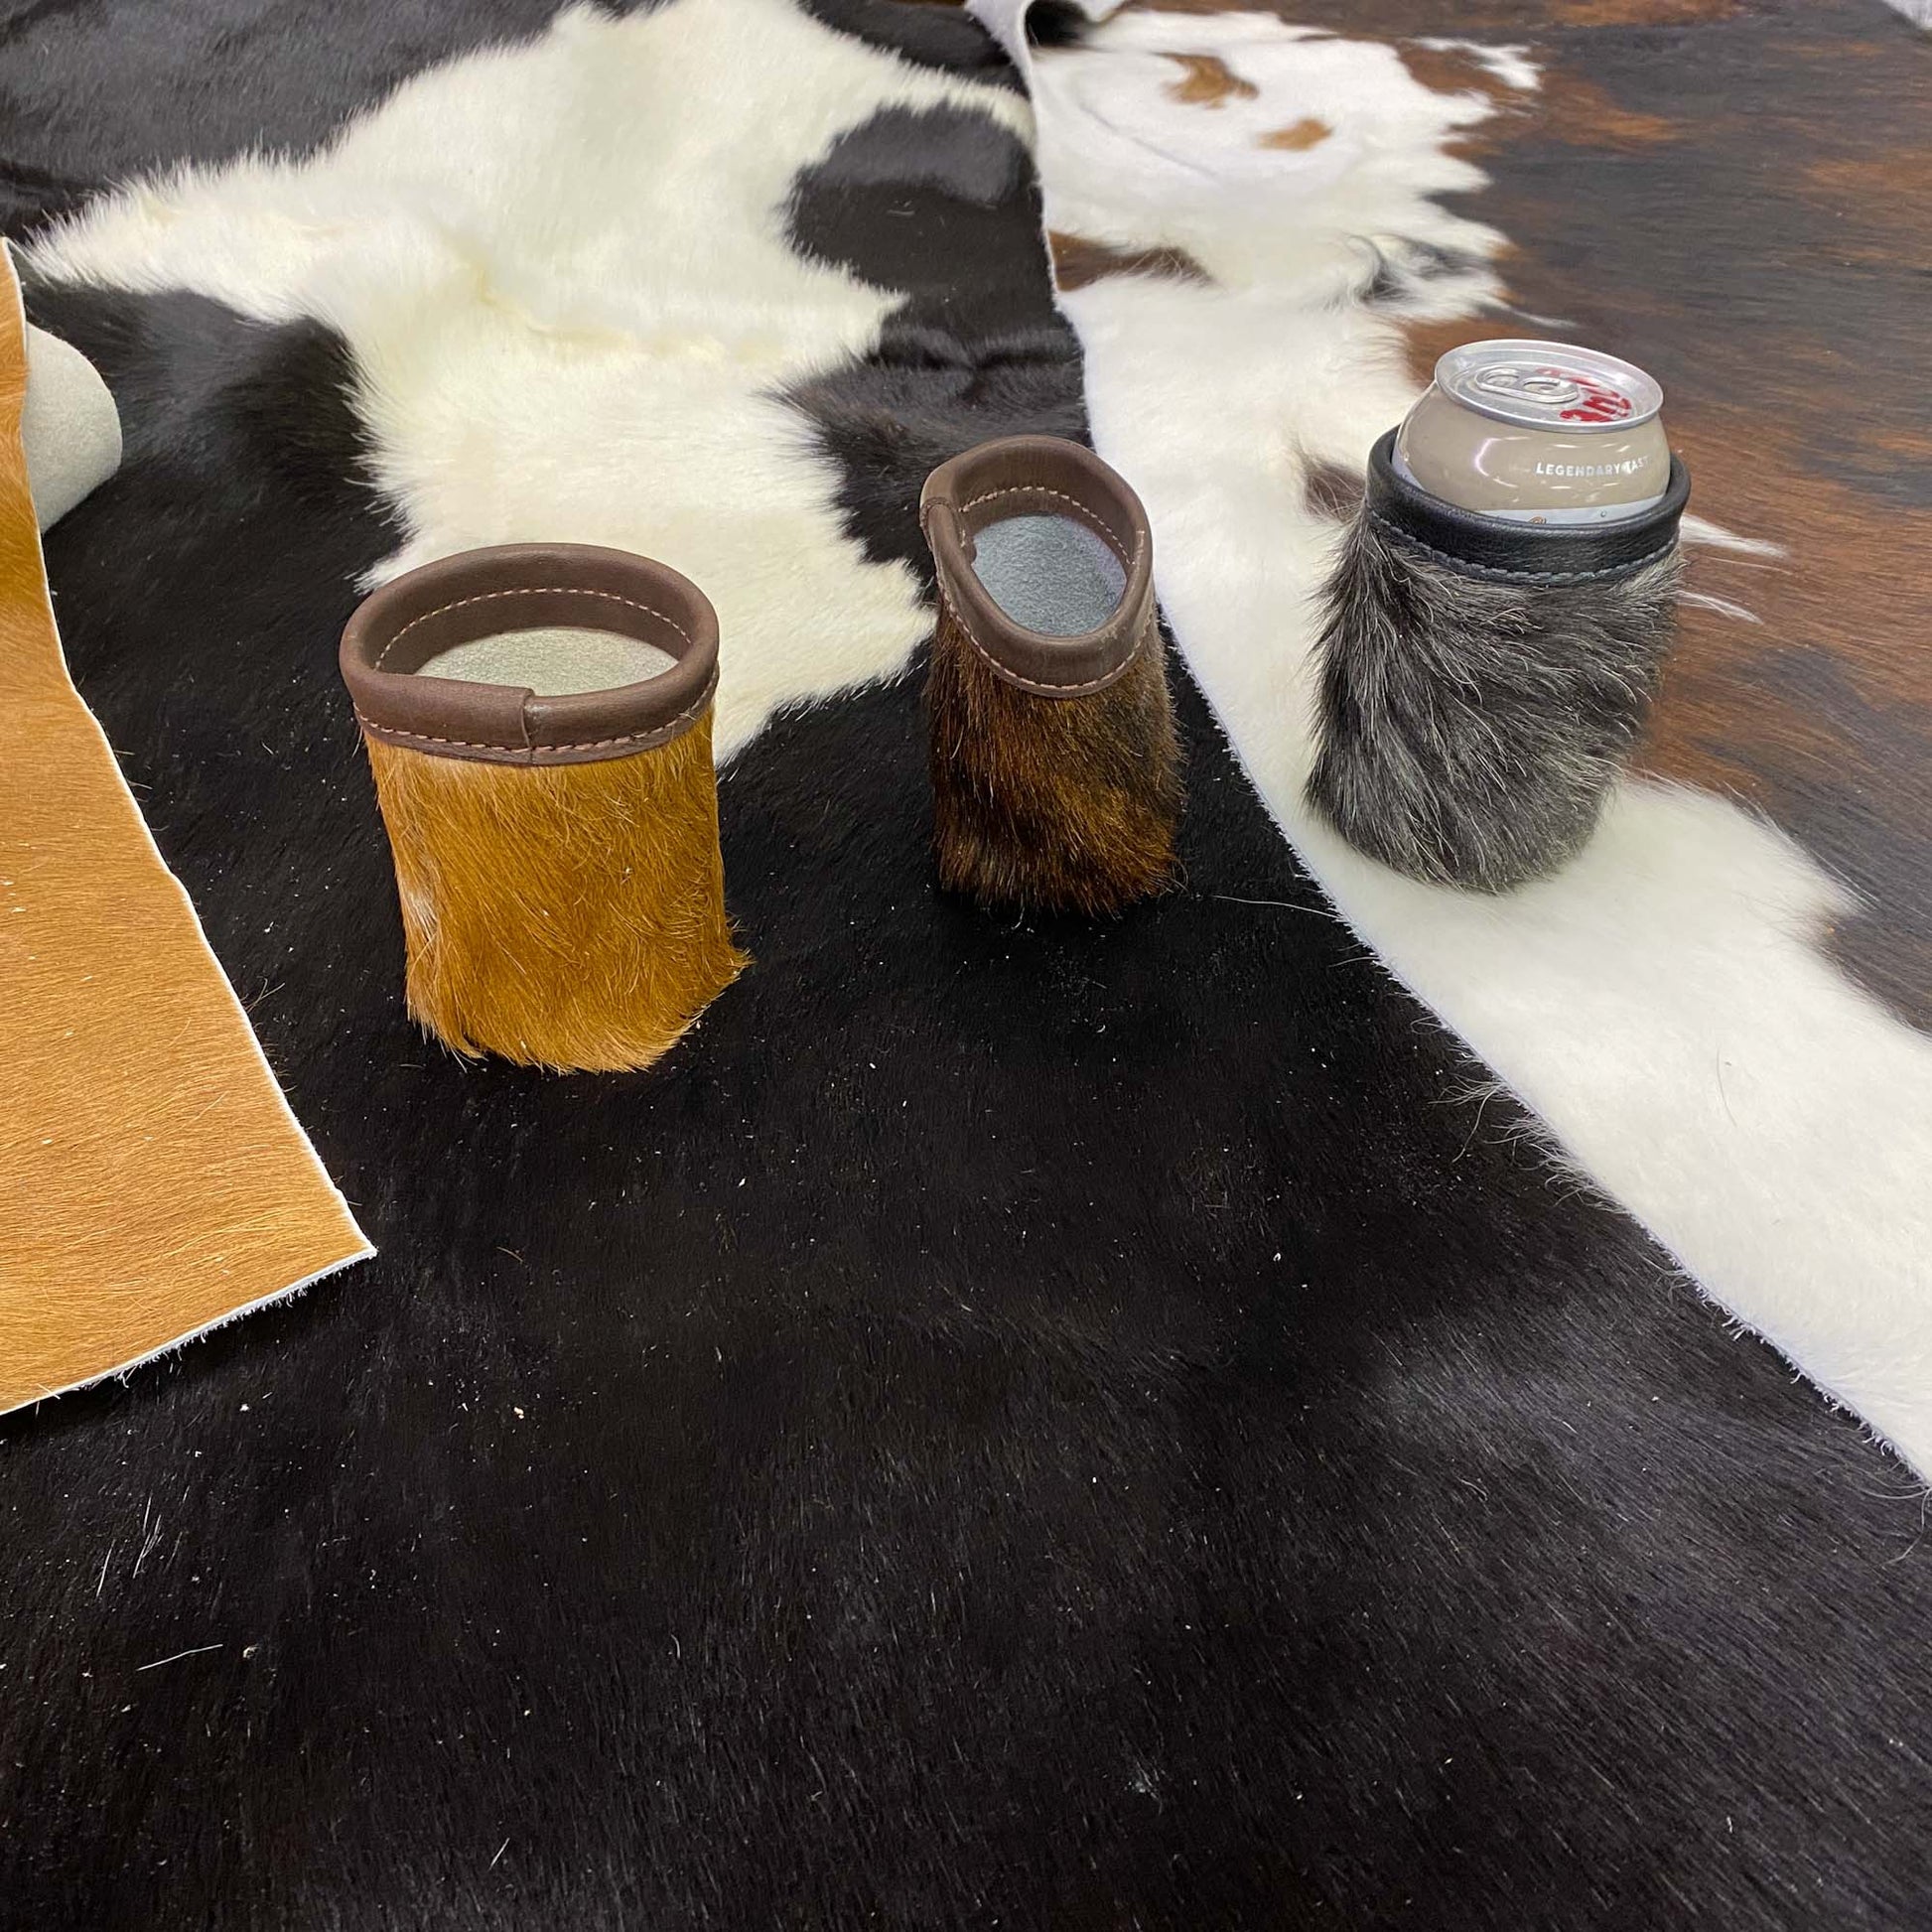 several "moozies" on a cowhide